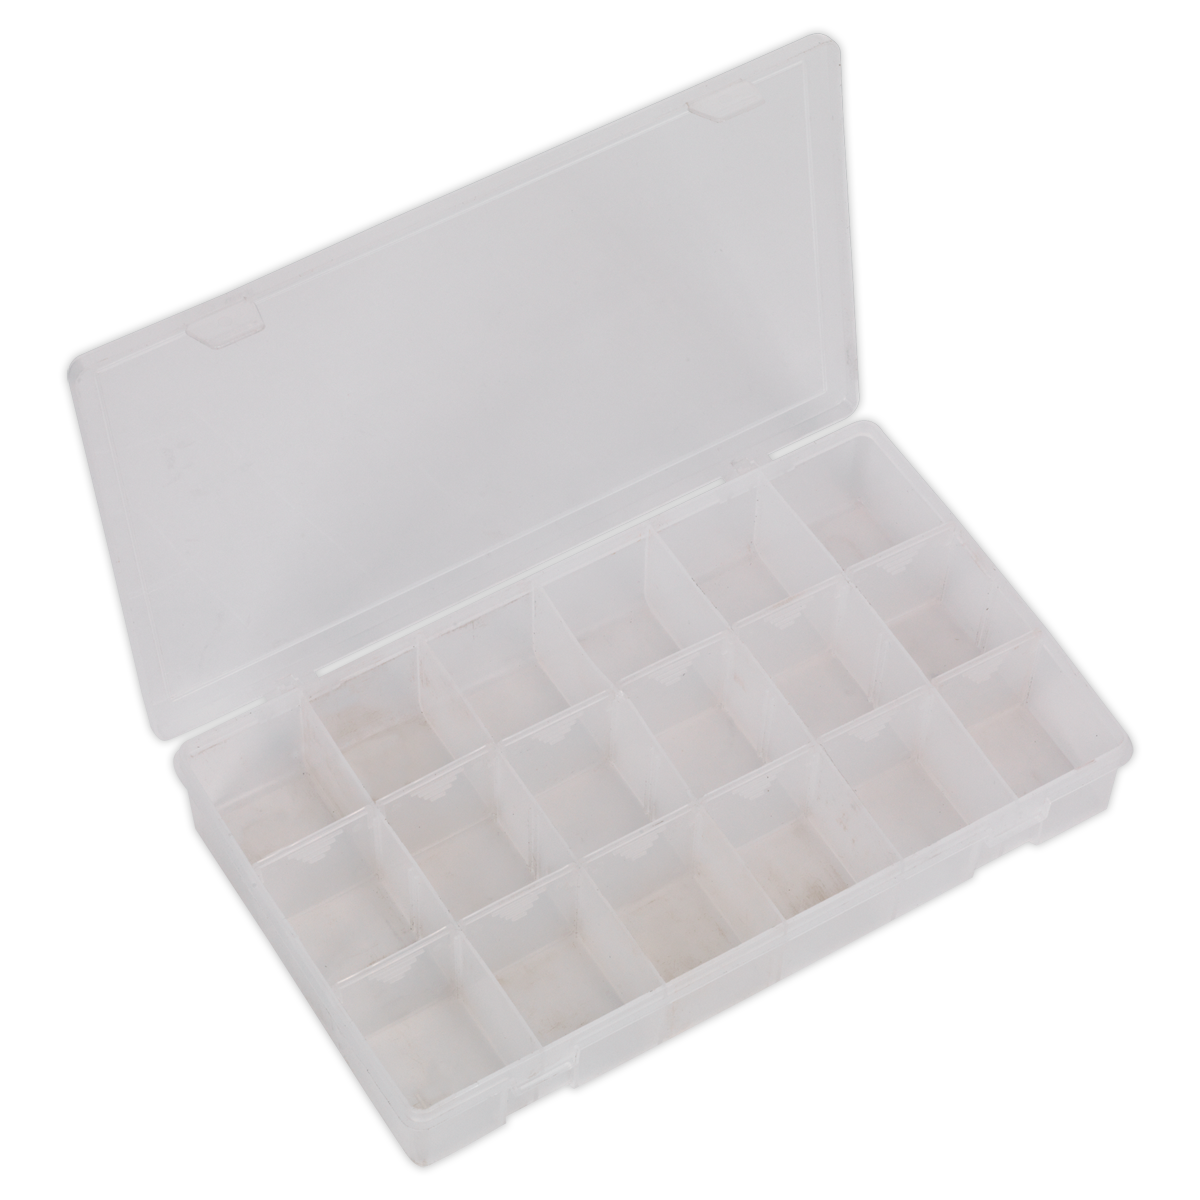 Sealey Assortment Box with 12 Removable Dividers